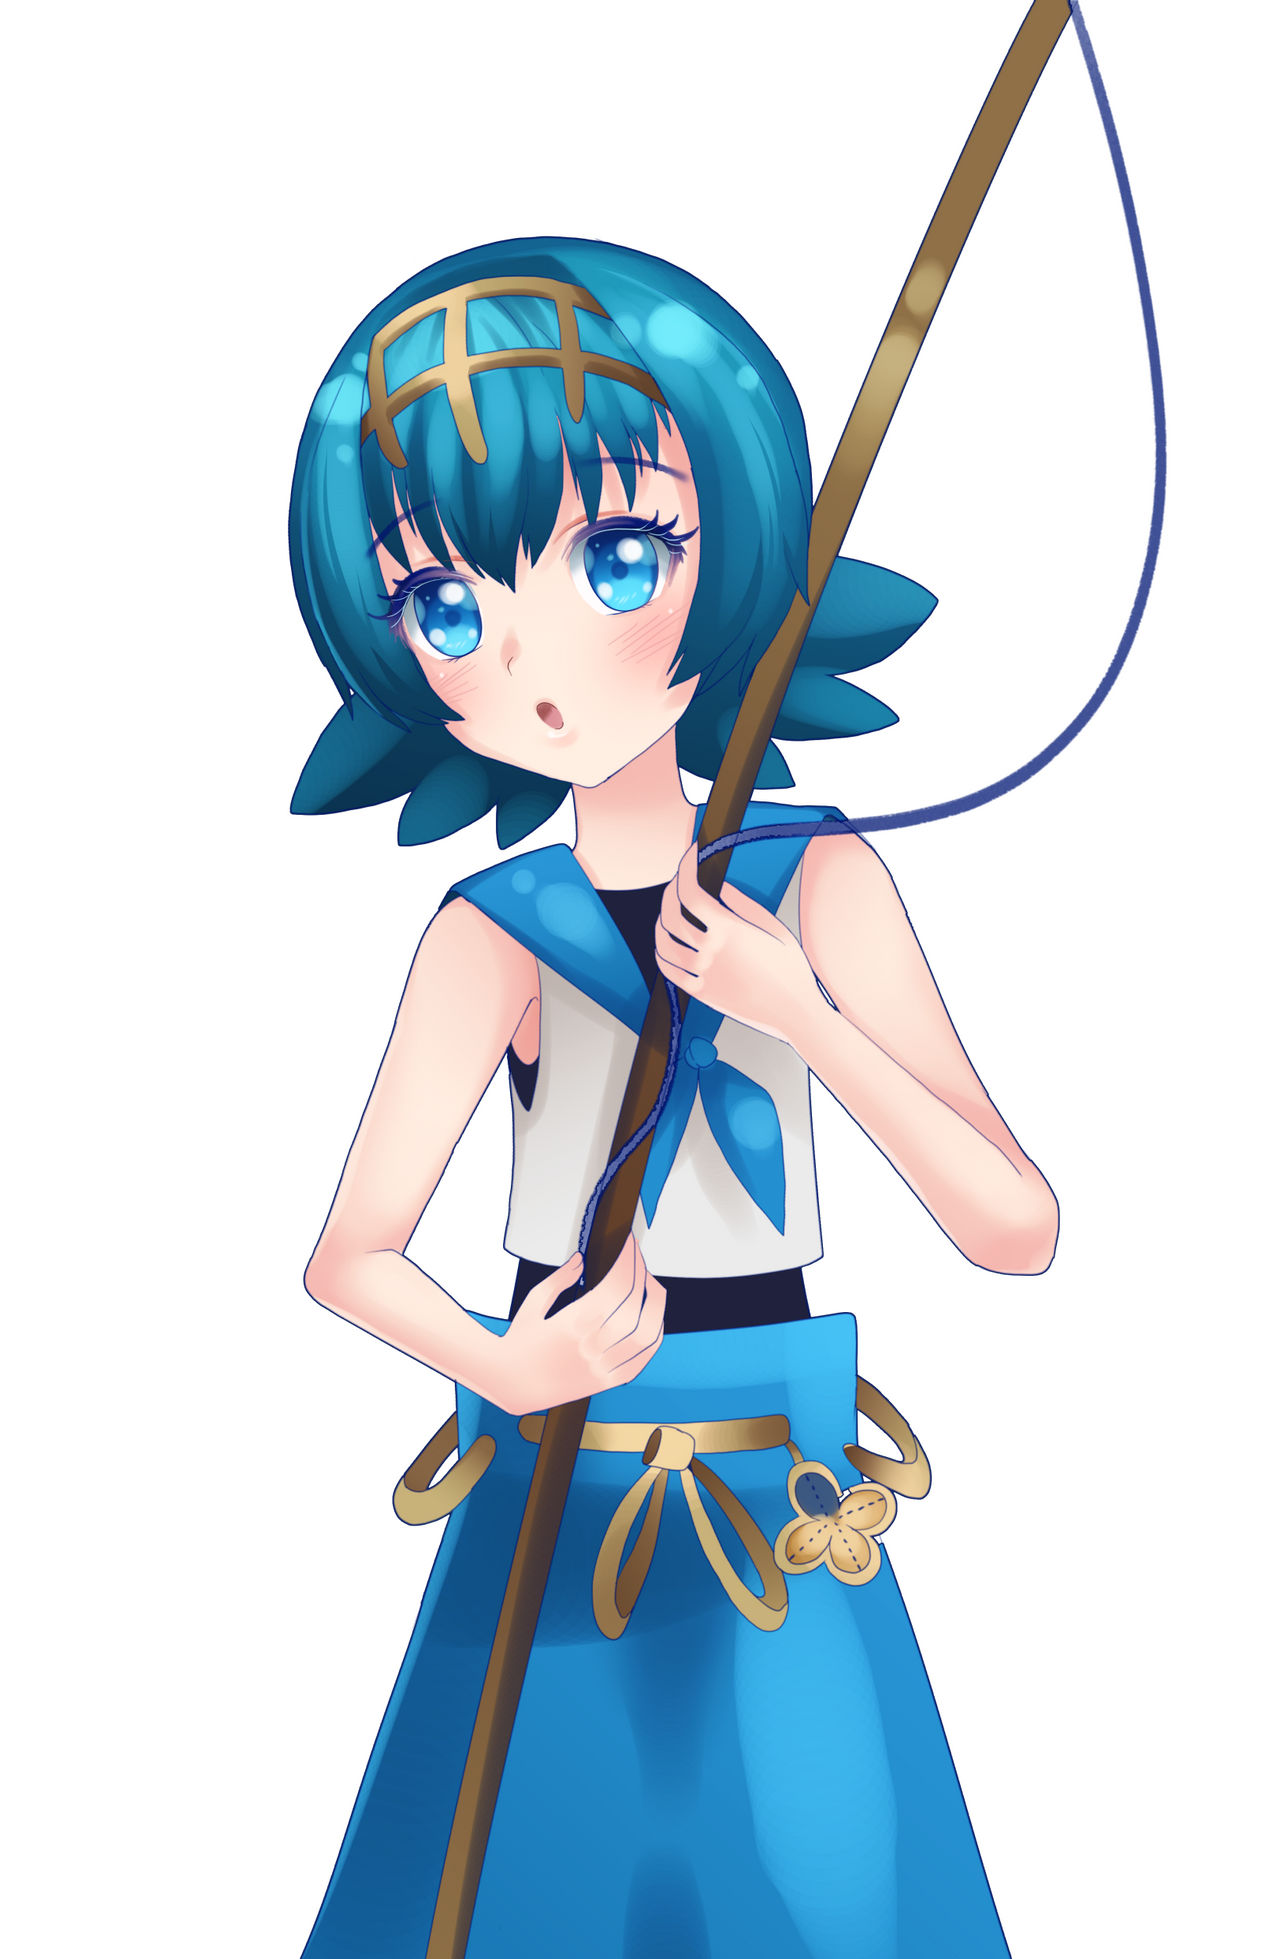 Lana with a fishing rod by SiilverAqua on DeviantArt